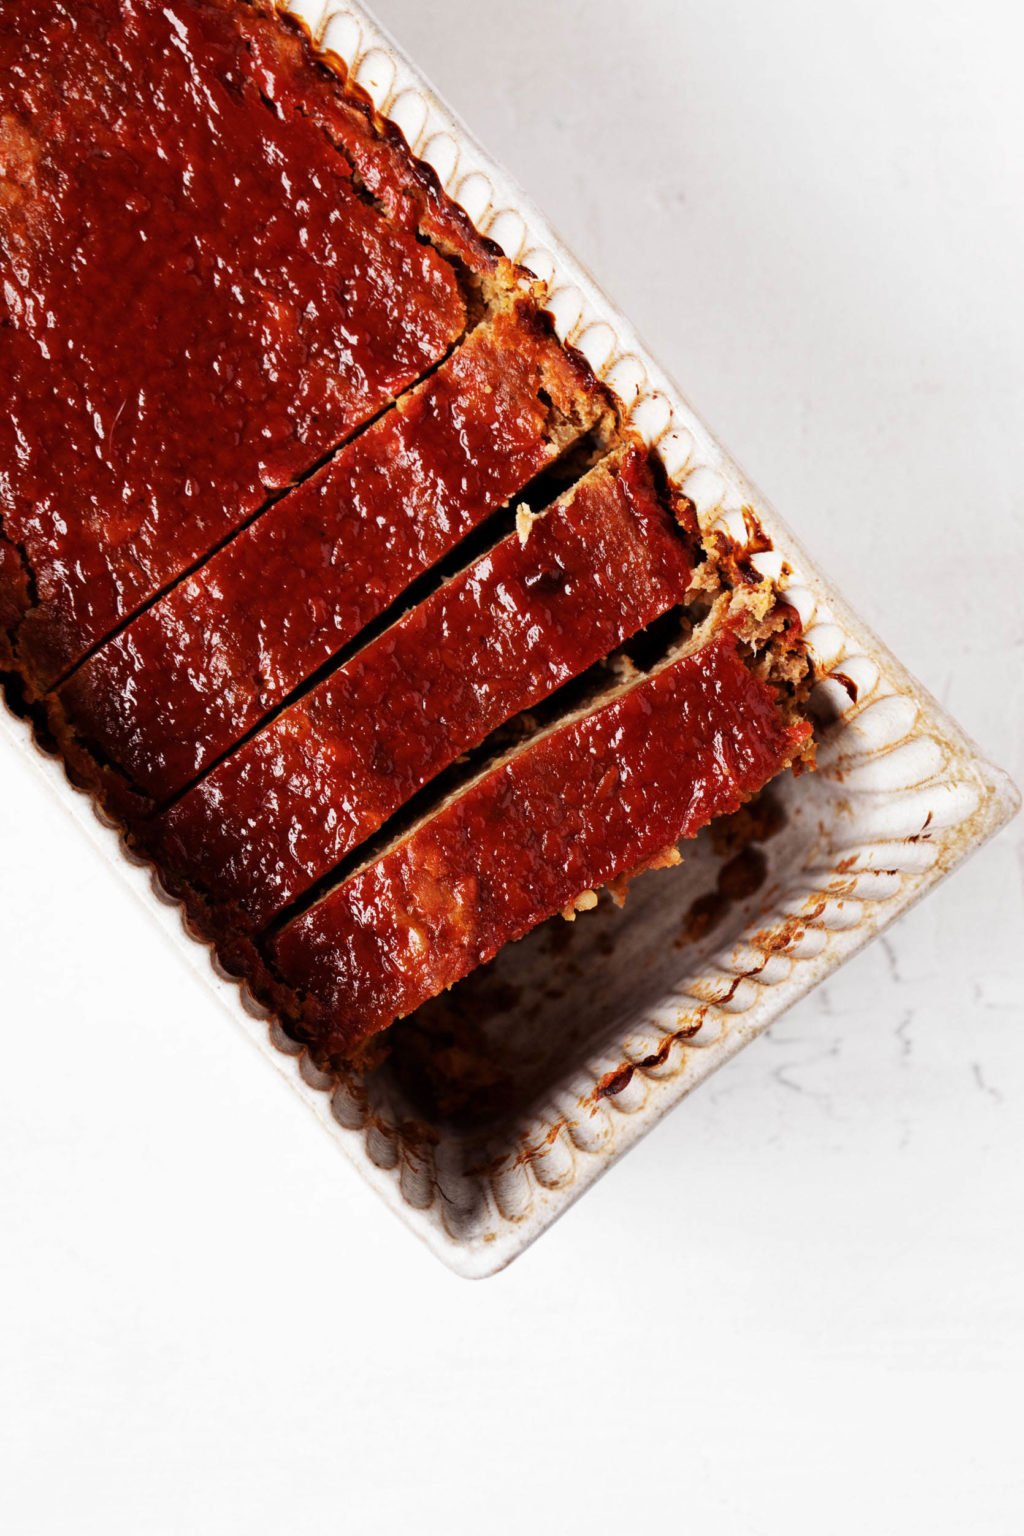 An overhead image of freshly baked, vegan meatloaf, topped with ketchup glaze.